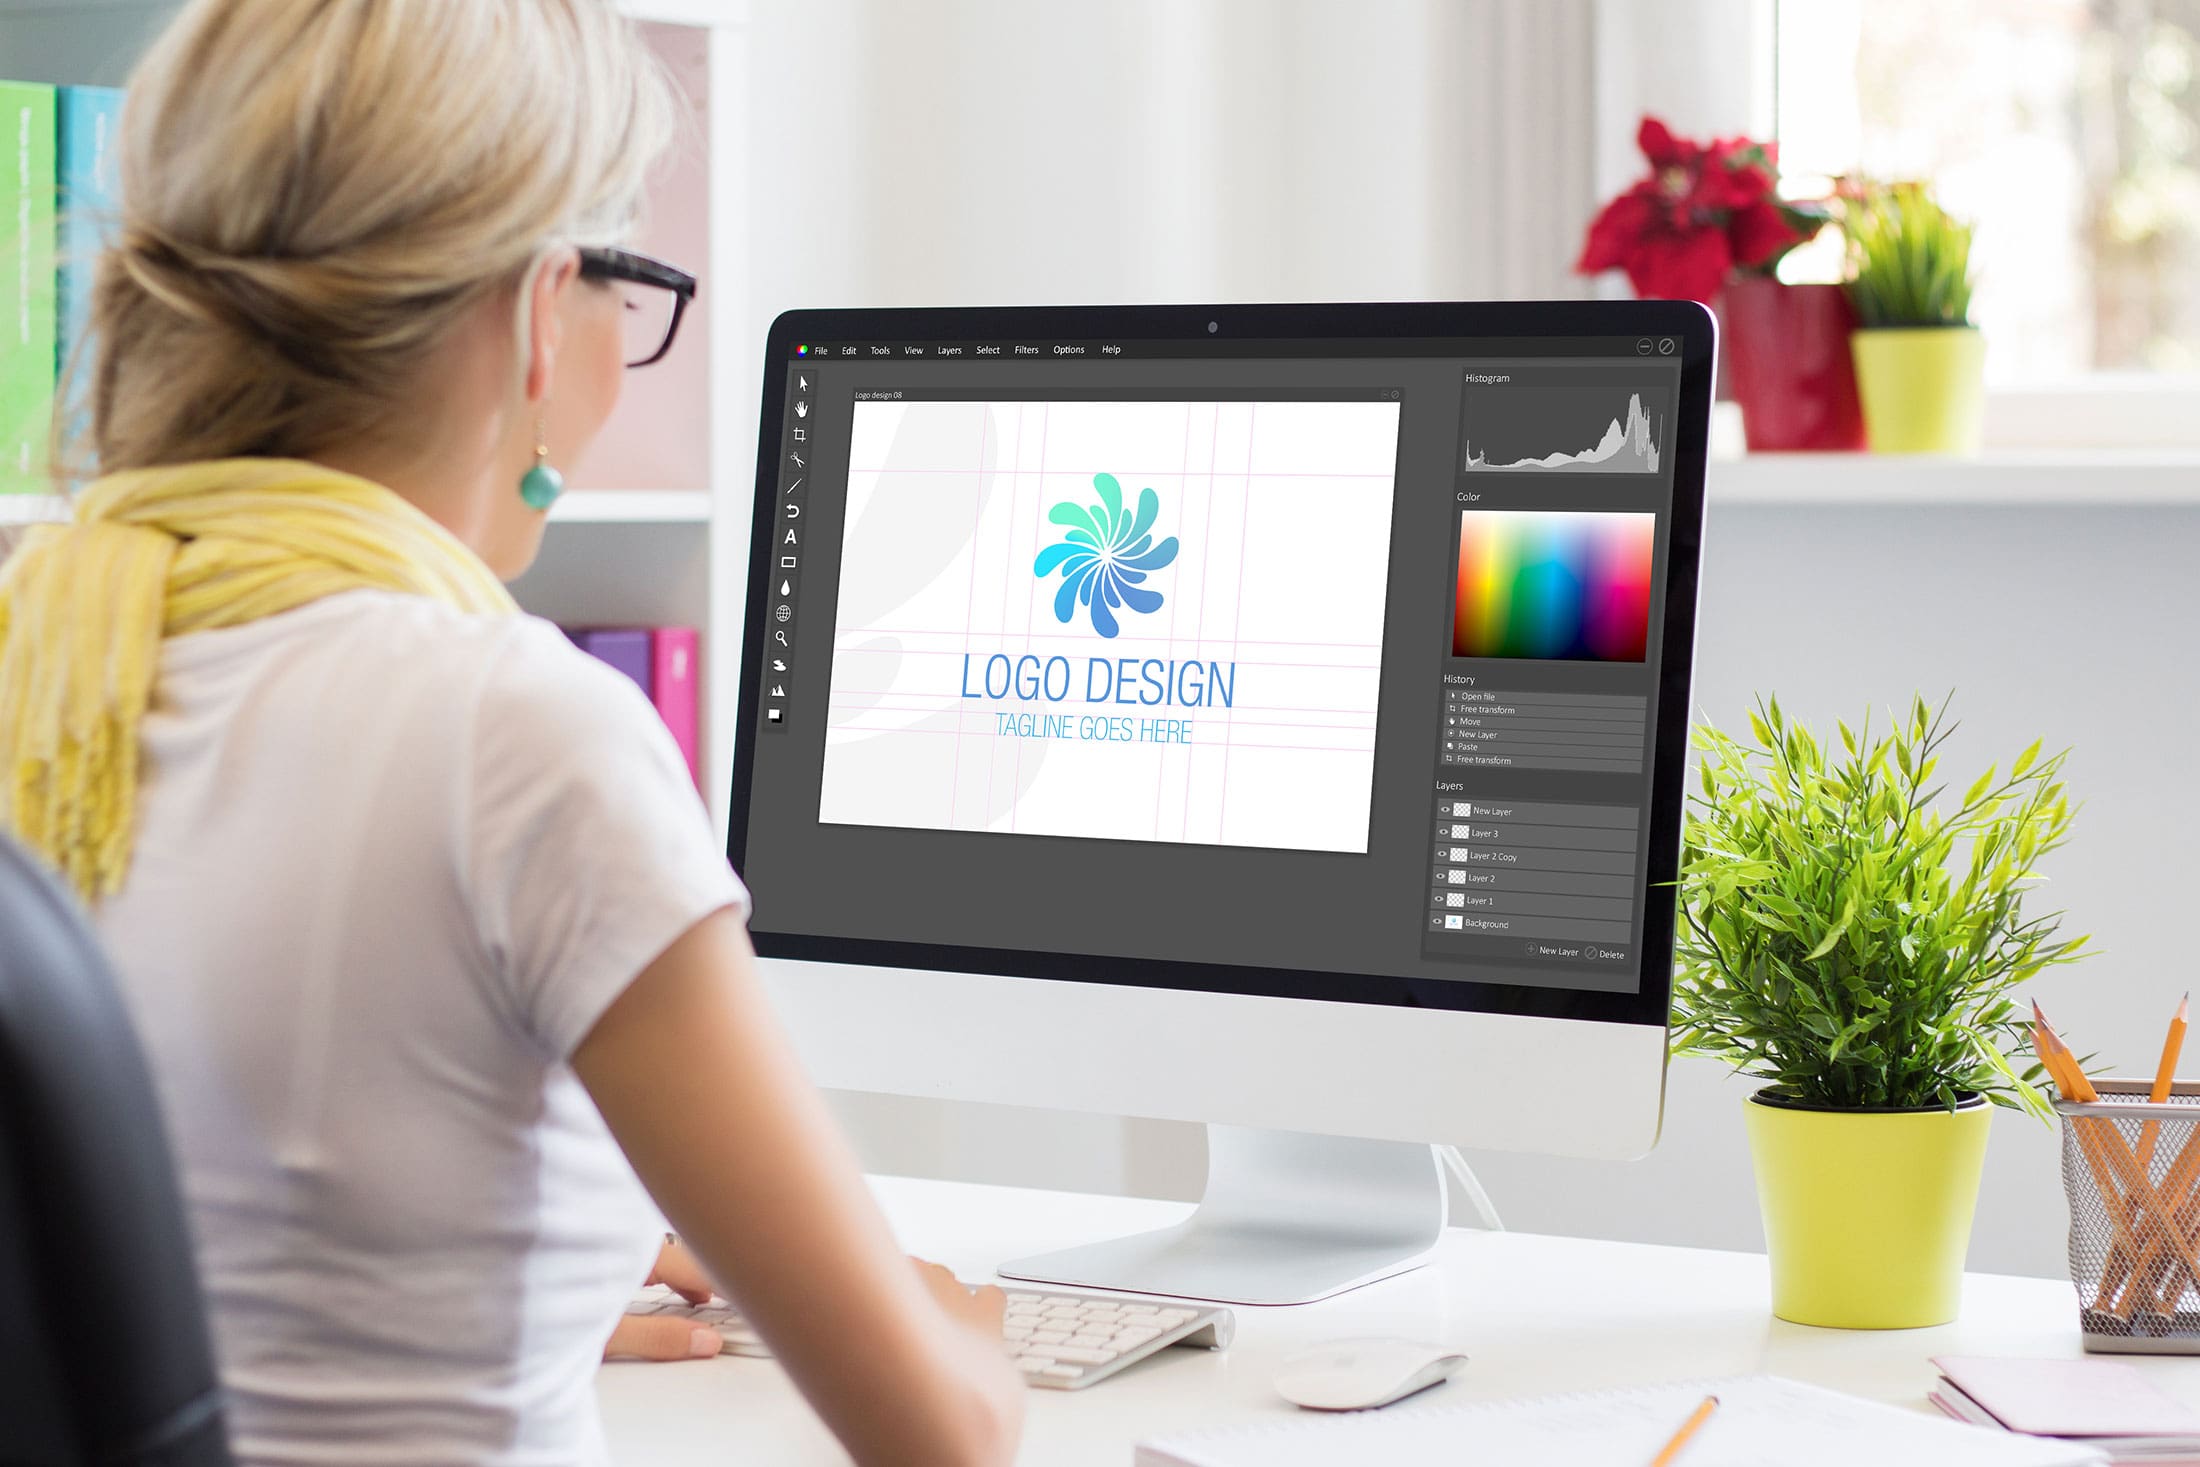 Why You Should Leave Logo Design To The Pros